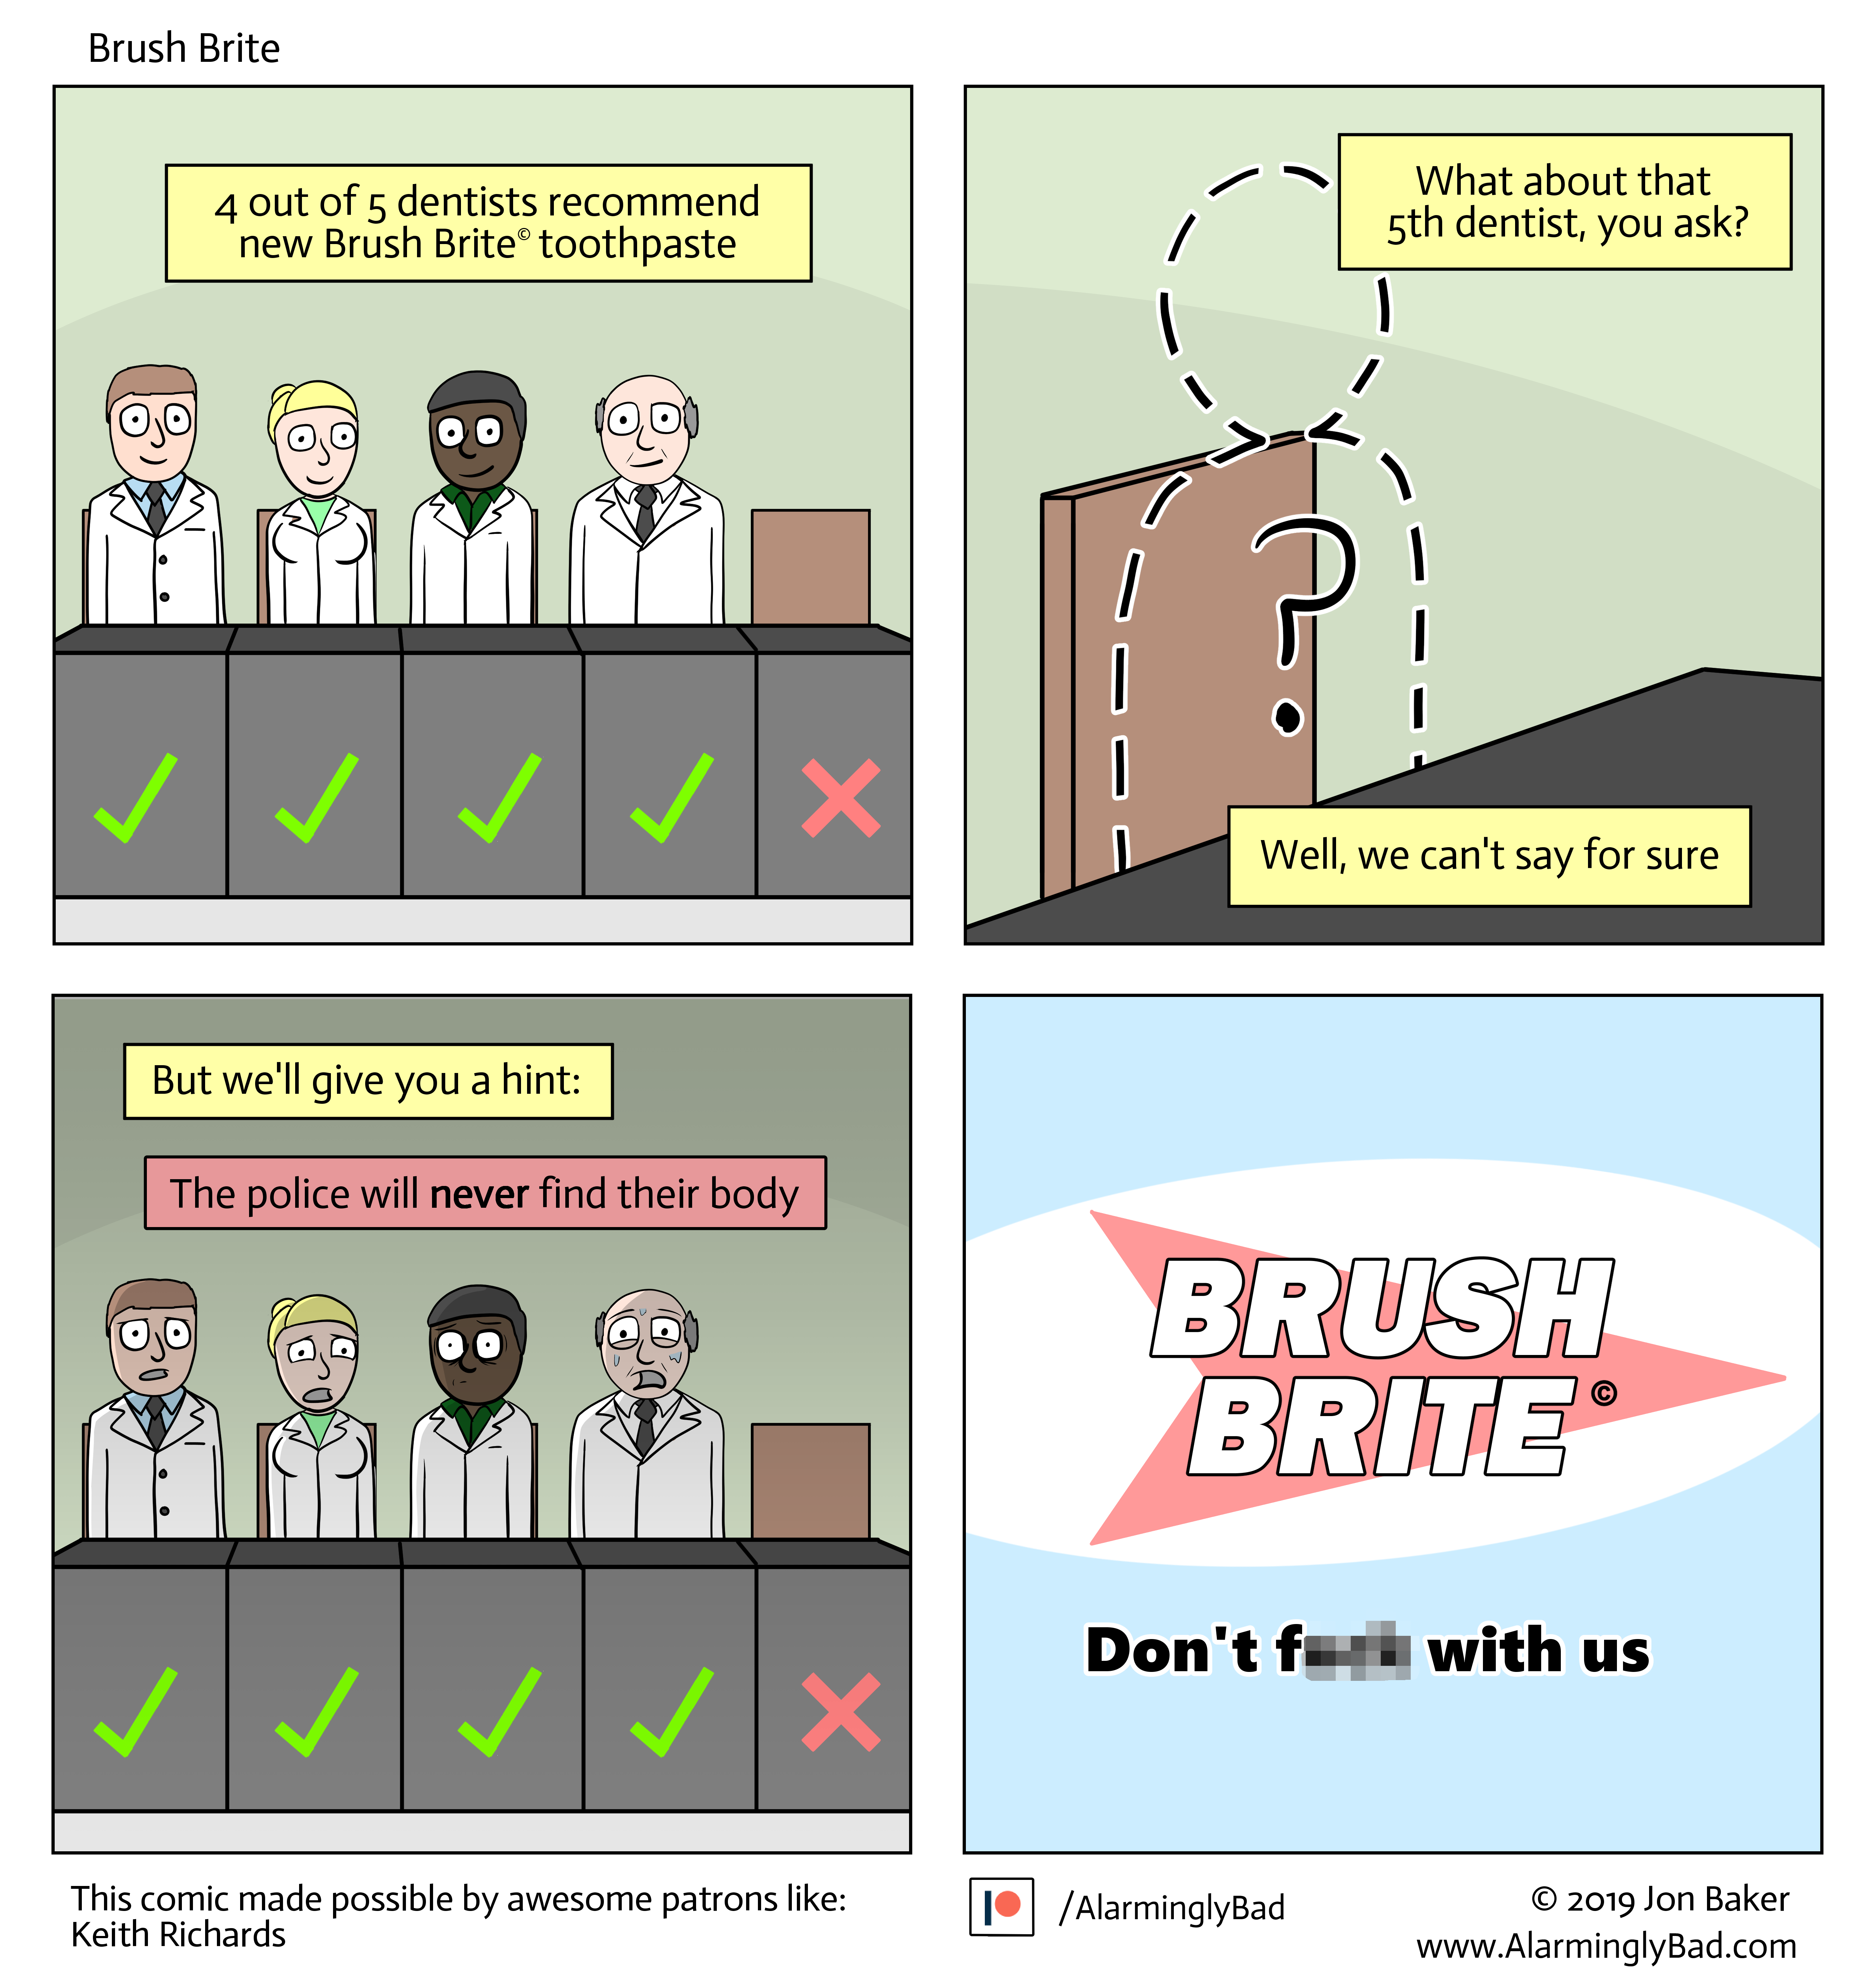 Brush Brite is the #1 leading cause of death for dentists who don't recommend Brush Brite